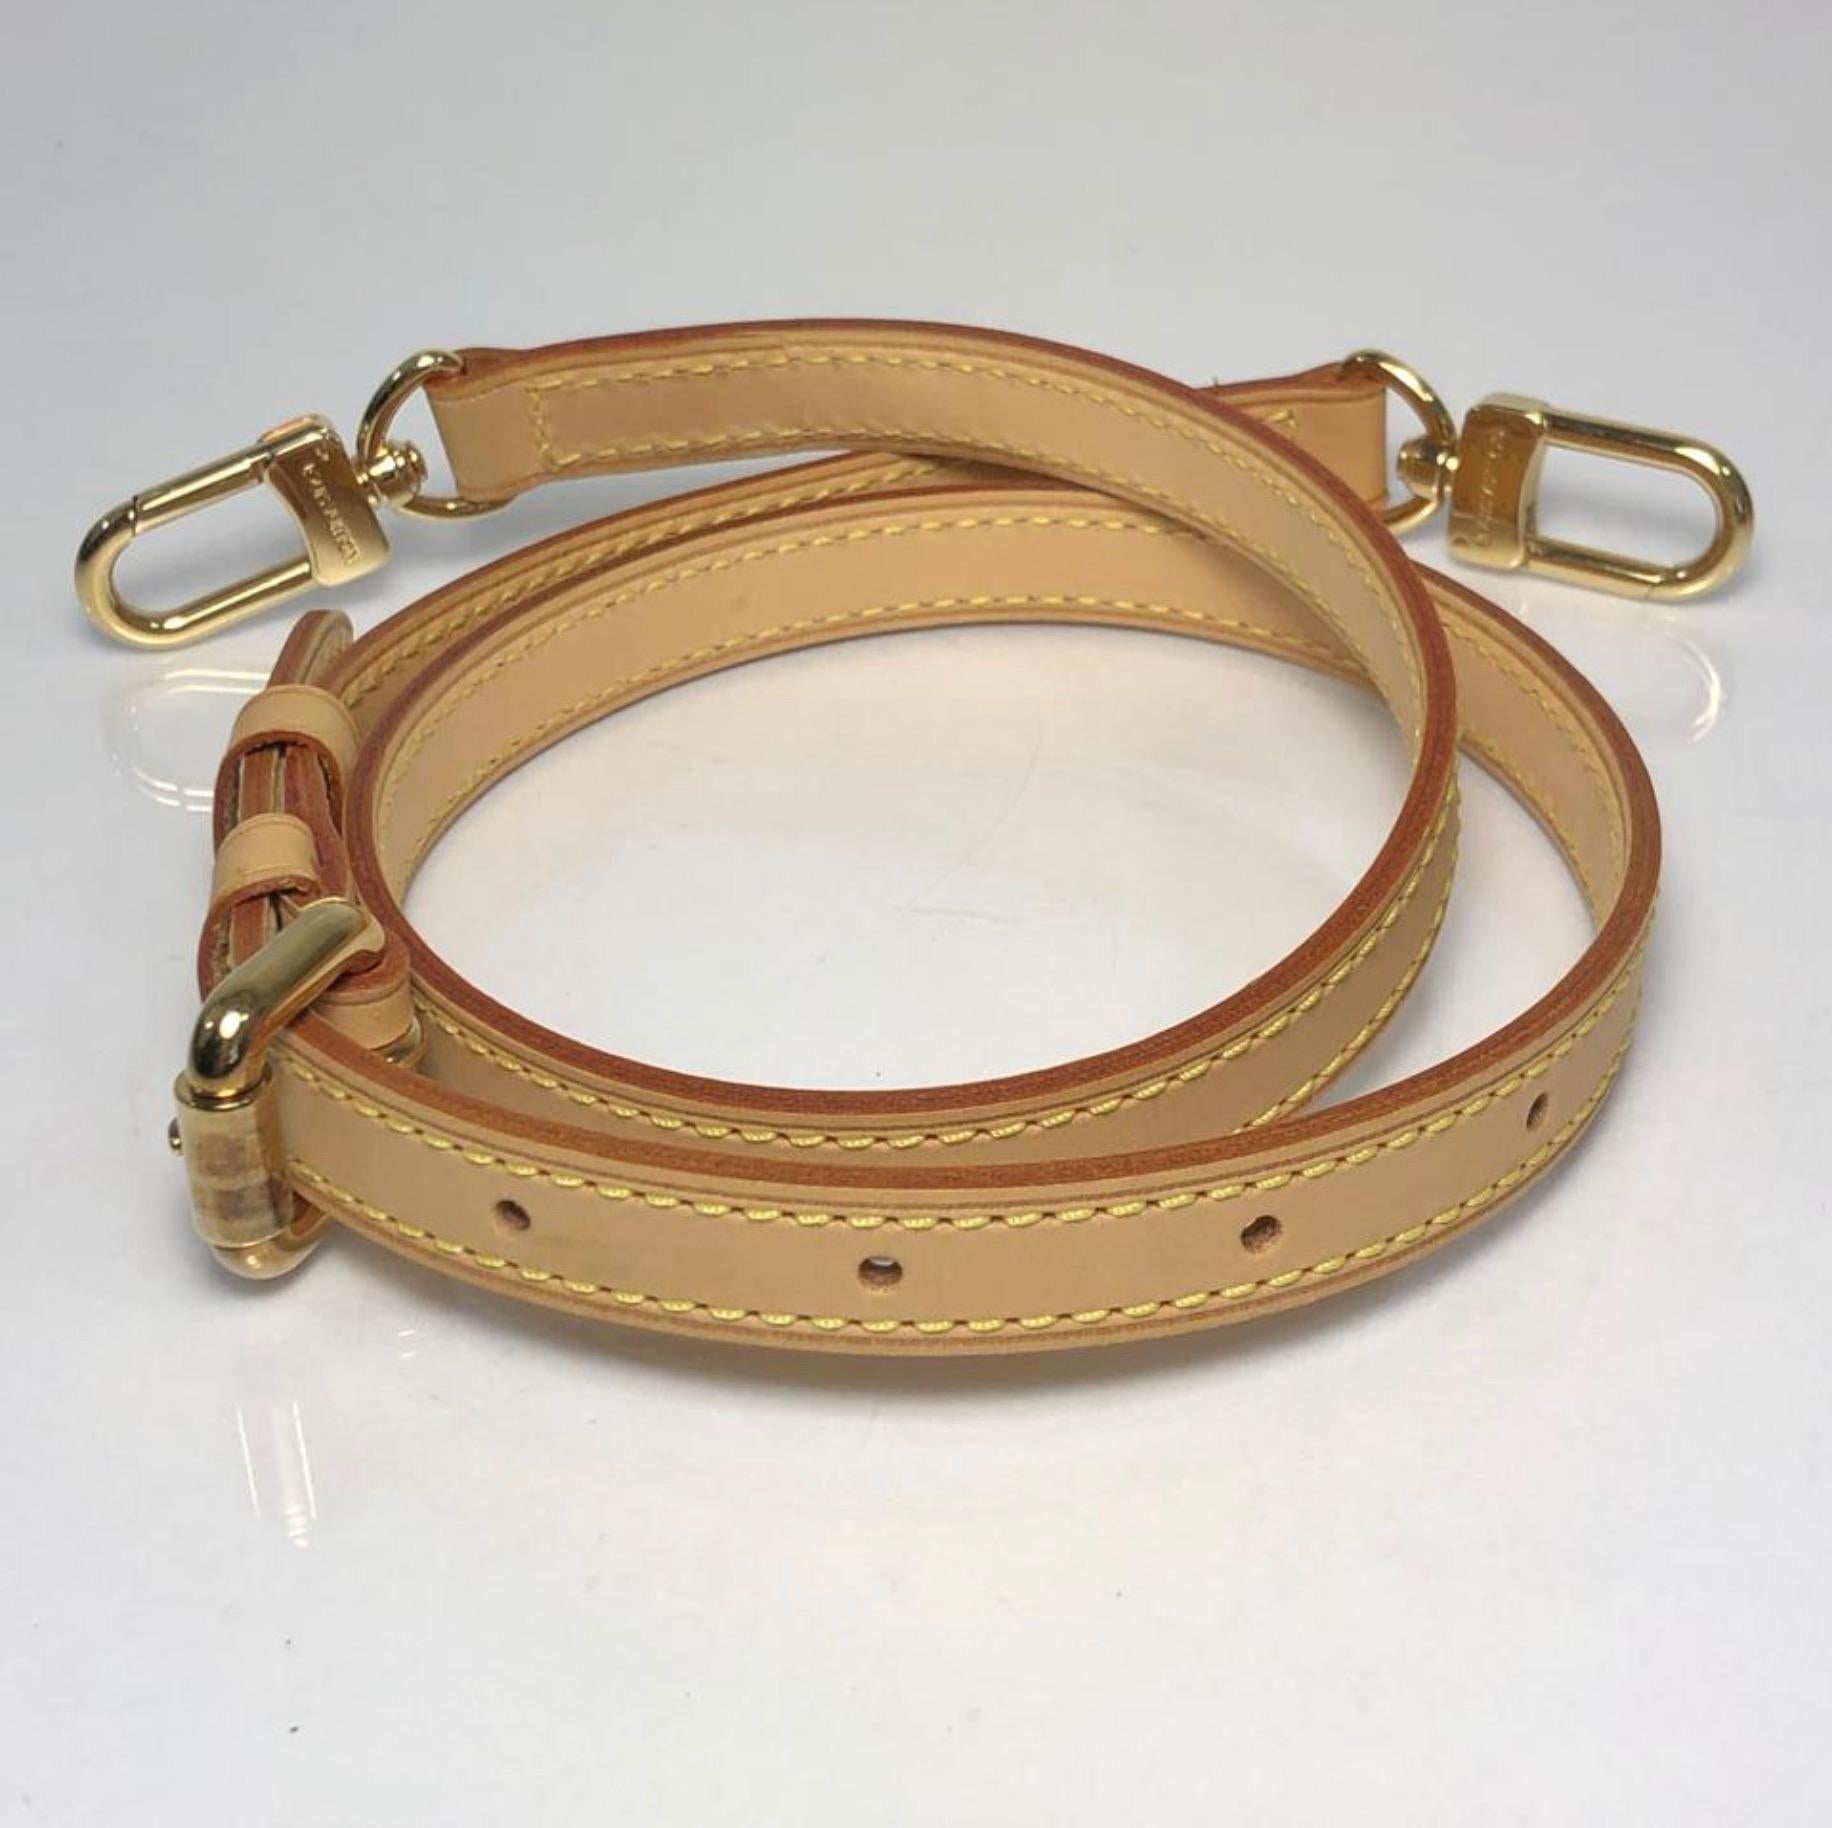  Louis Vuitton Strap Vachette - Shoulder (Narrow and Adjustable) In Excellent Condition For Sale In Saint Charles, IL